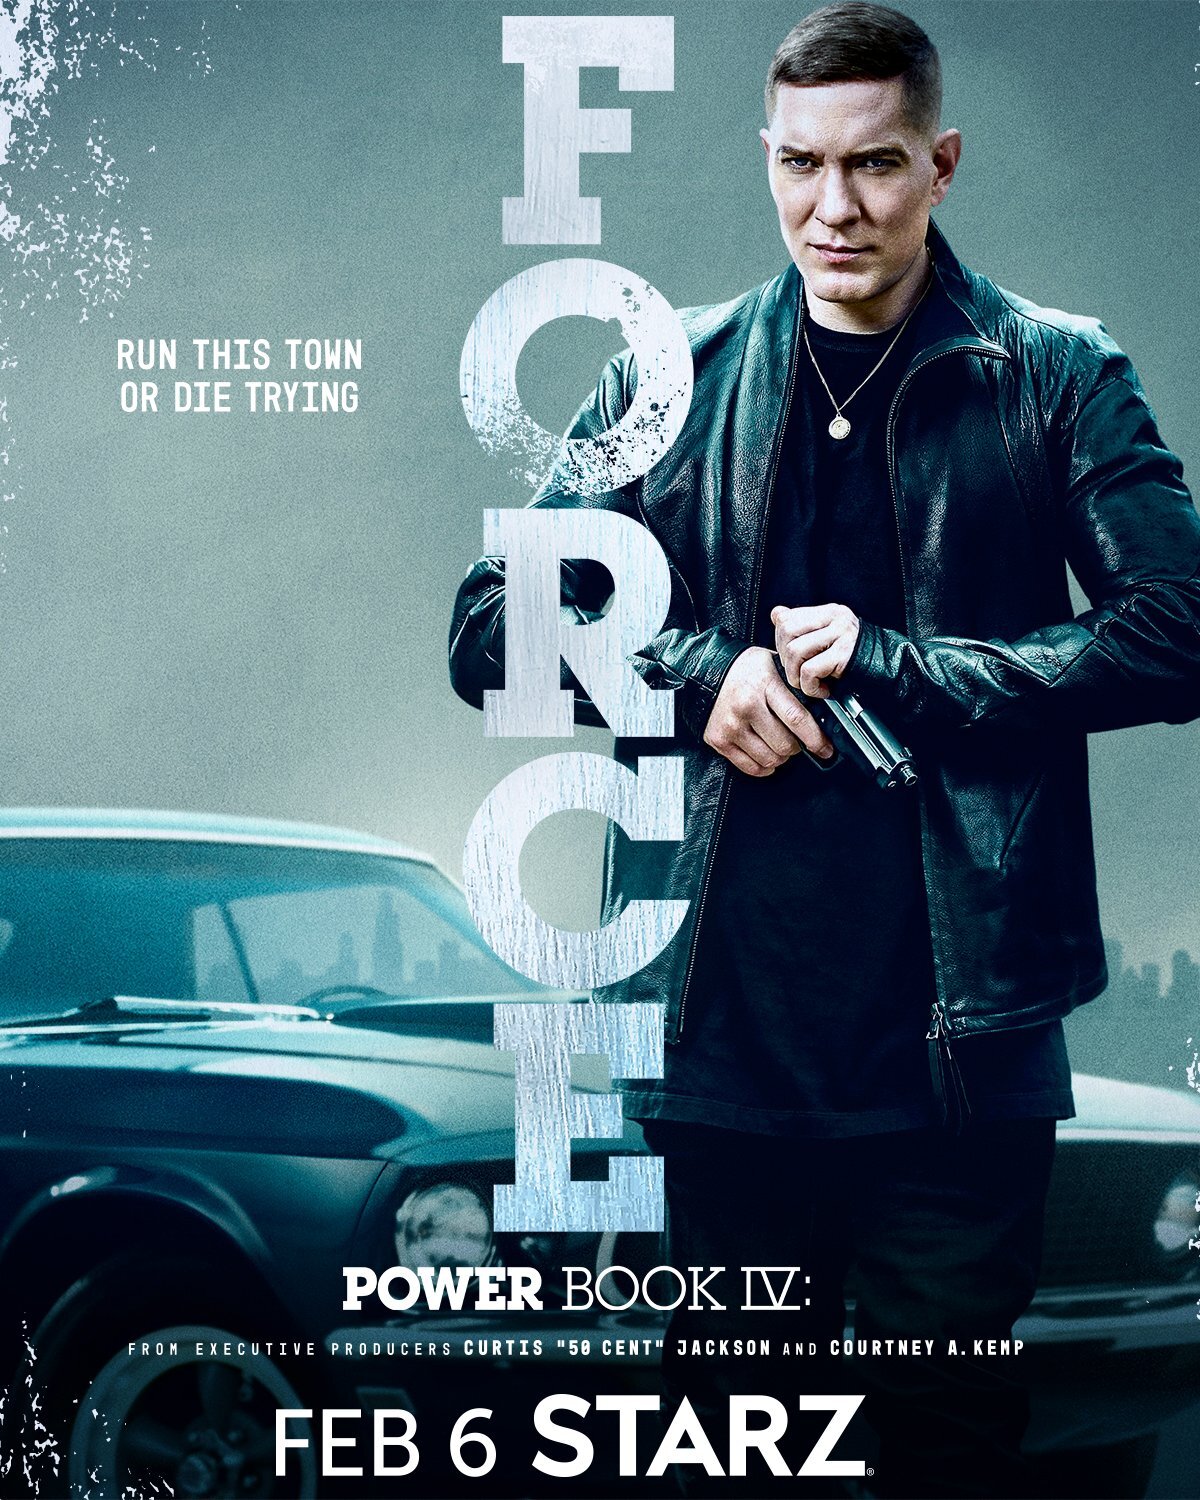 New Clip From Starz Original Series 'Power Book IV: Force' - Season 1, Episode 8